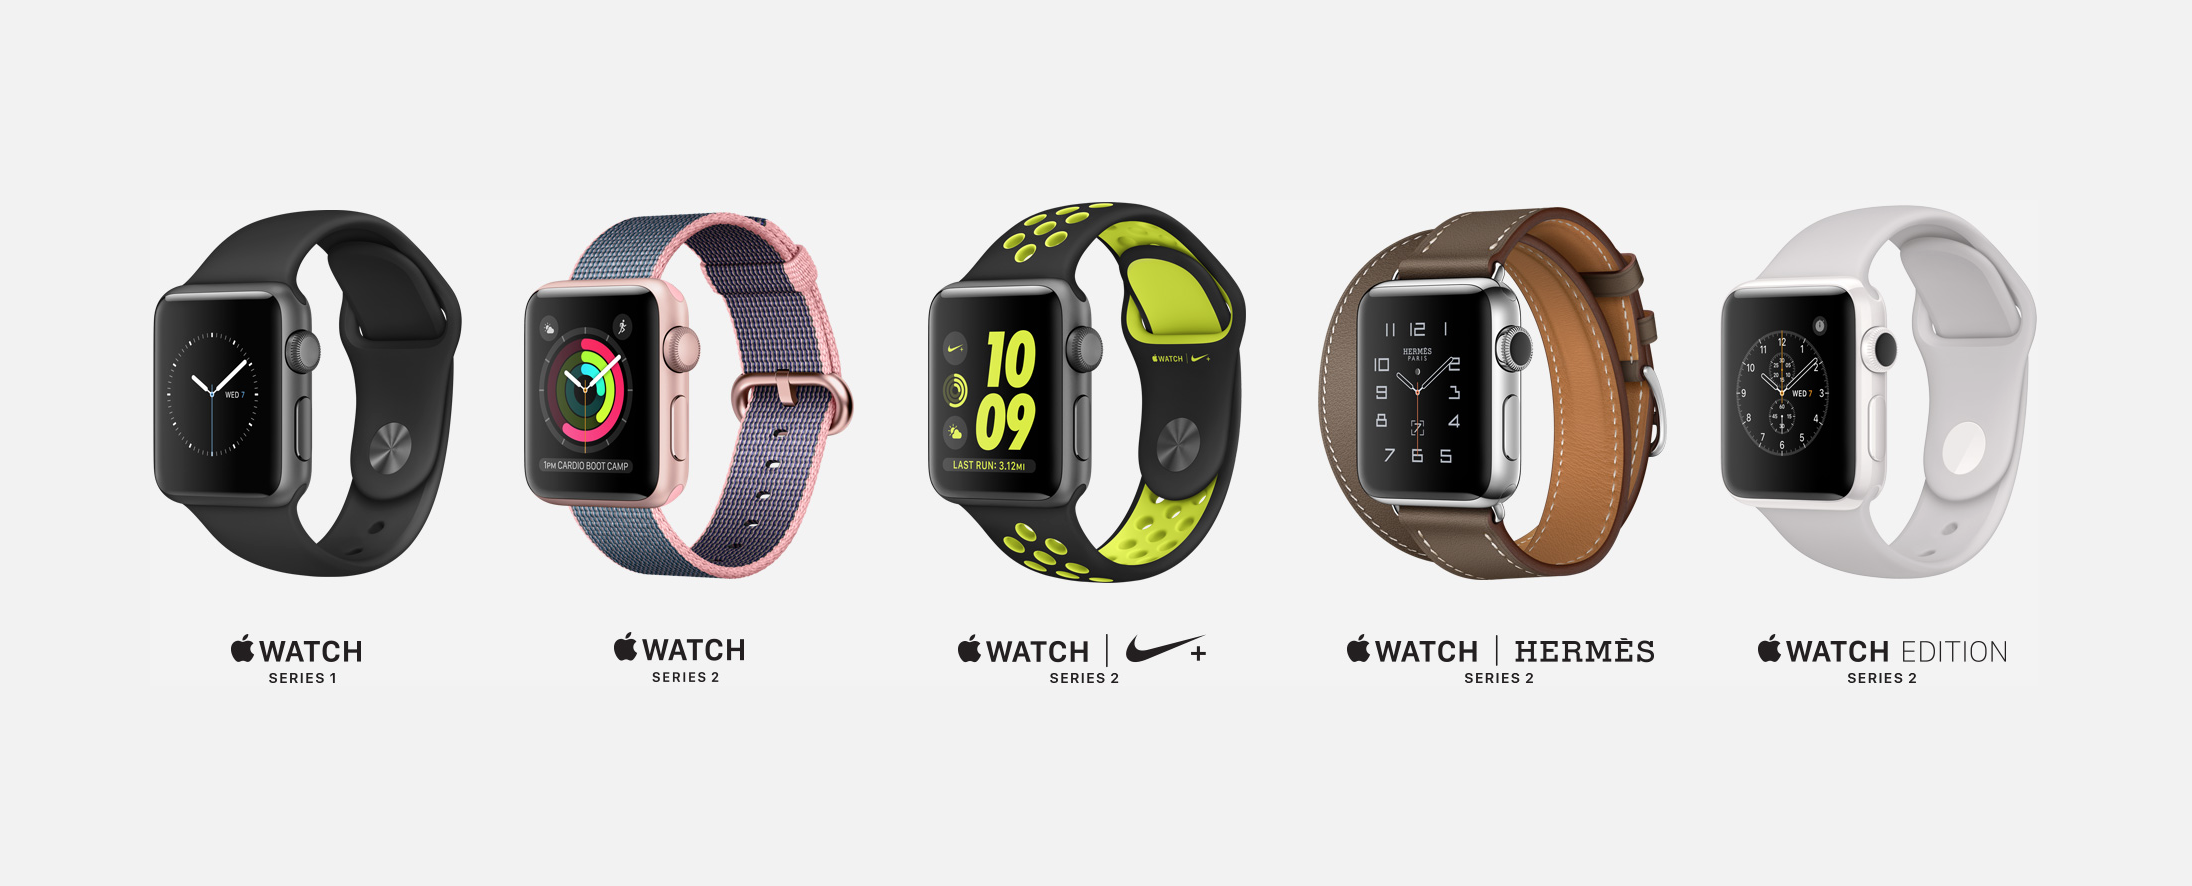 Apple Watch Series 2 Thicker and Heavier Than Predecessor